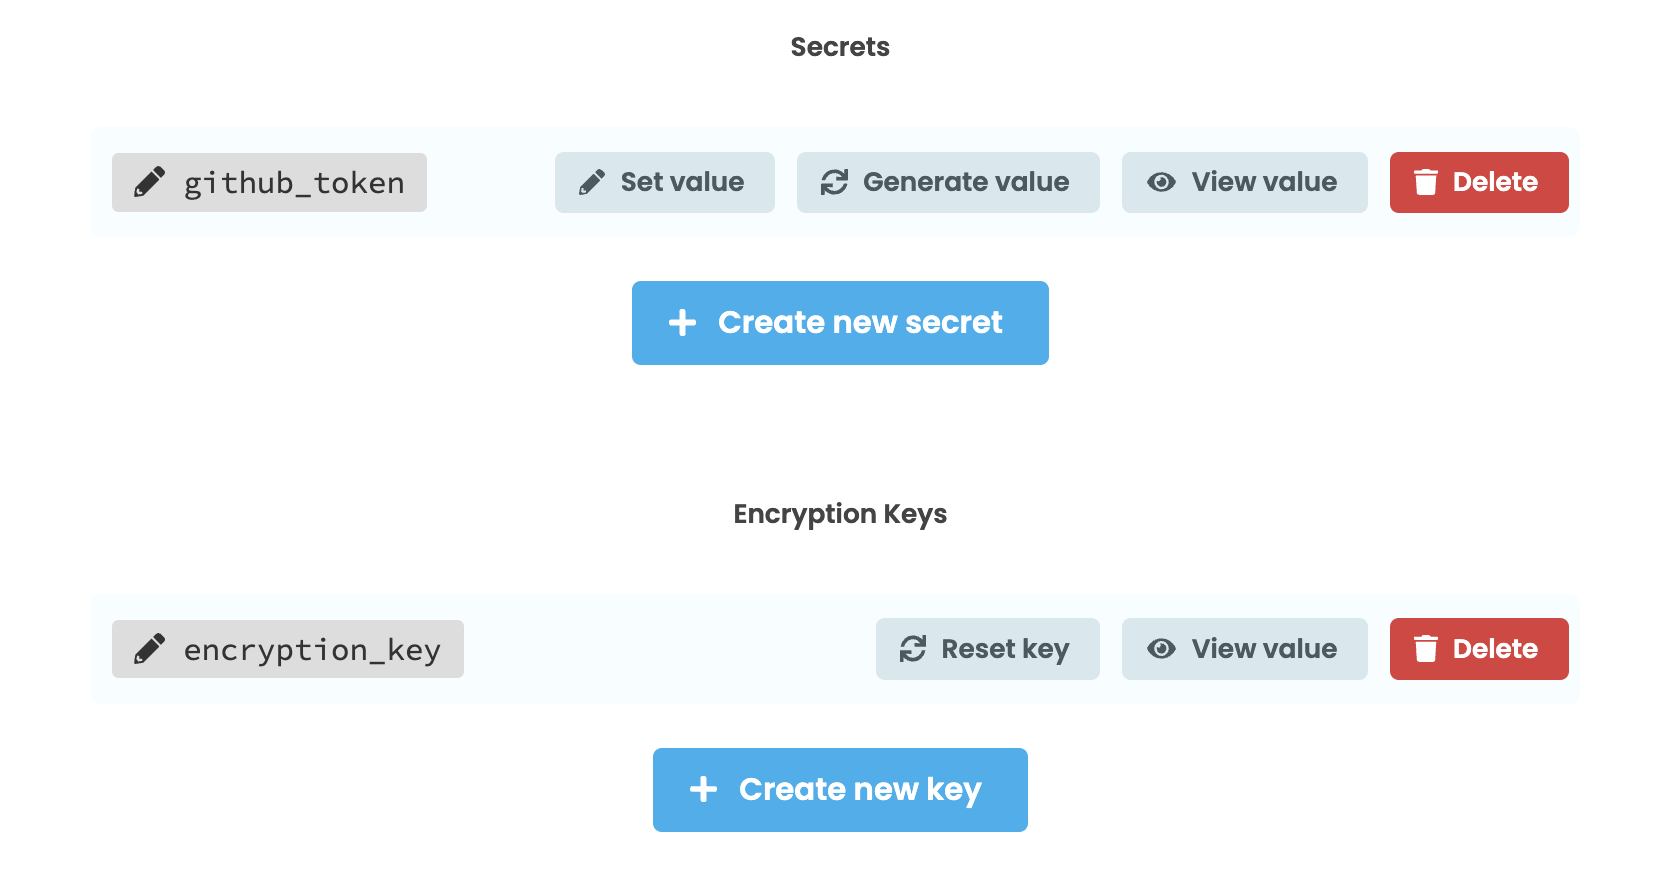 The Anvil Secrets Service view - a list of Secrets and of Encryption Keys, with buttons to create and delete each.